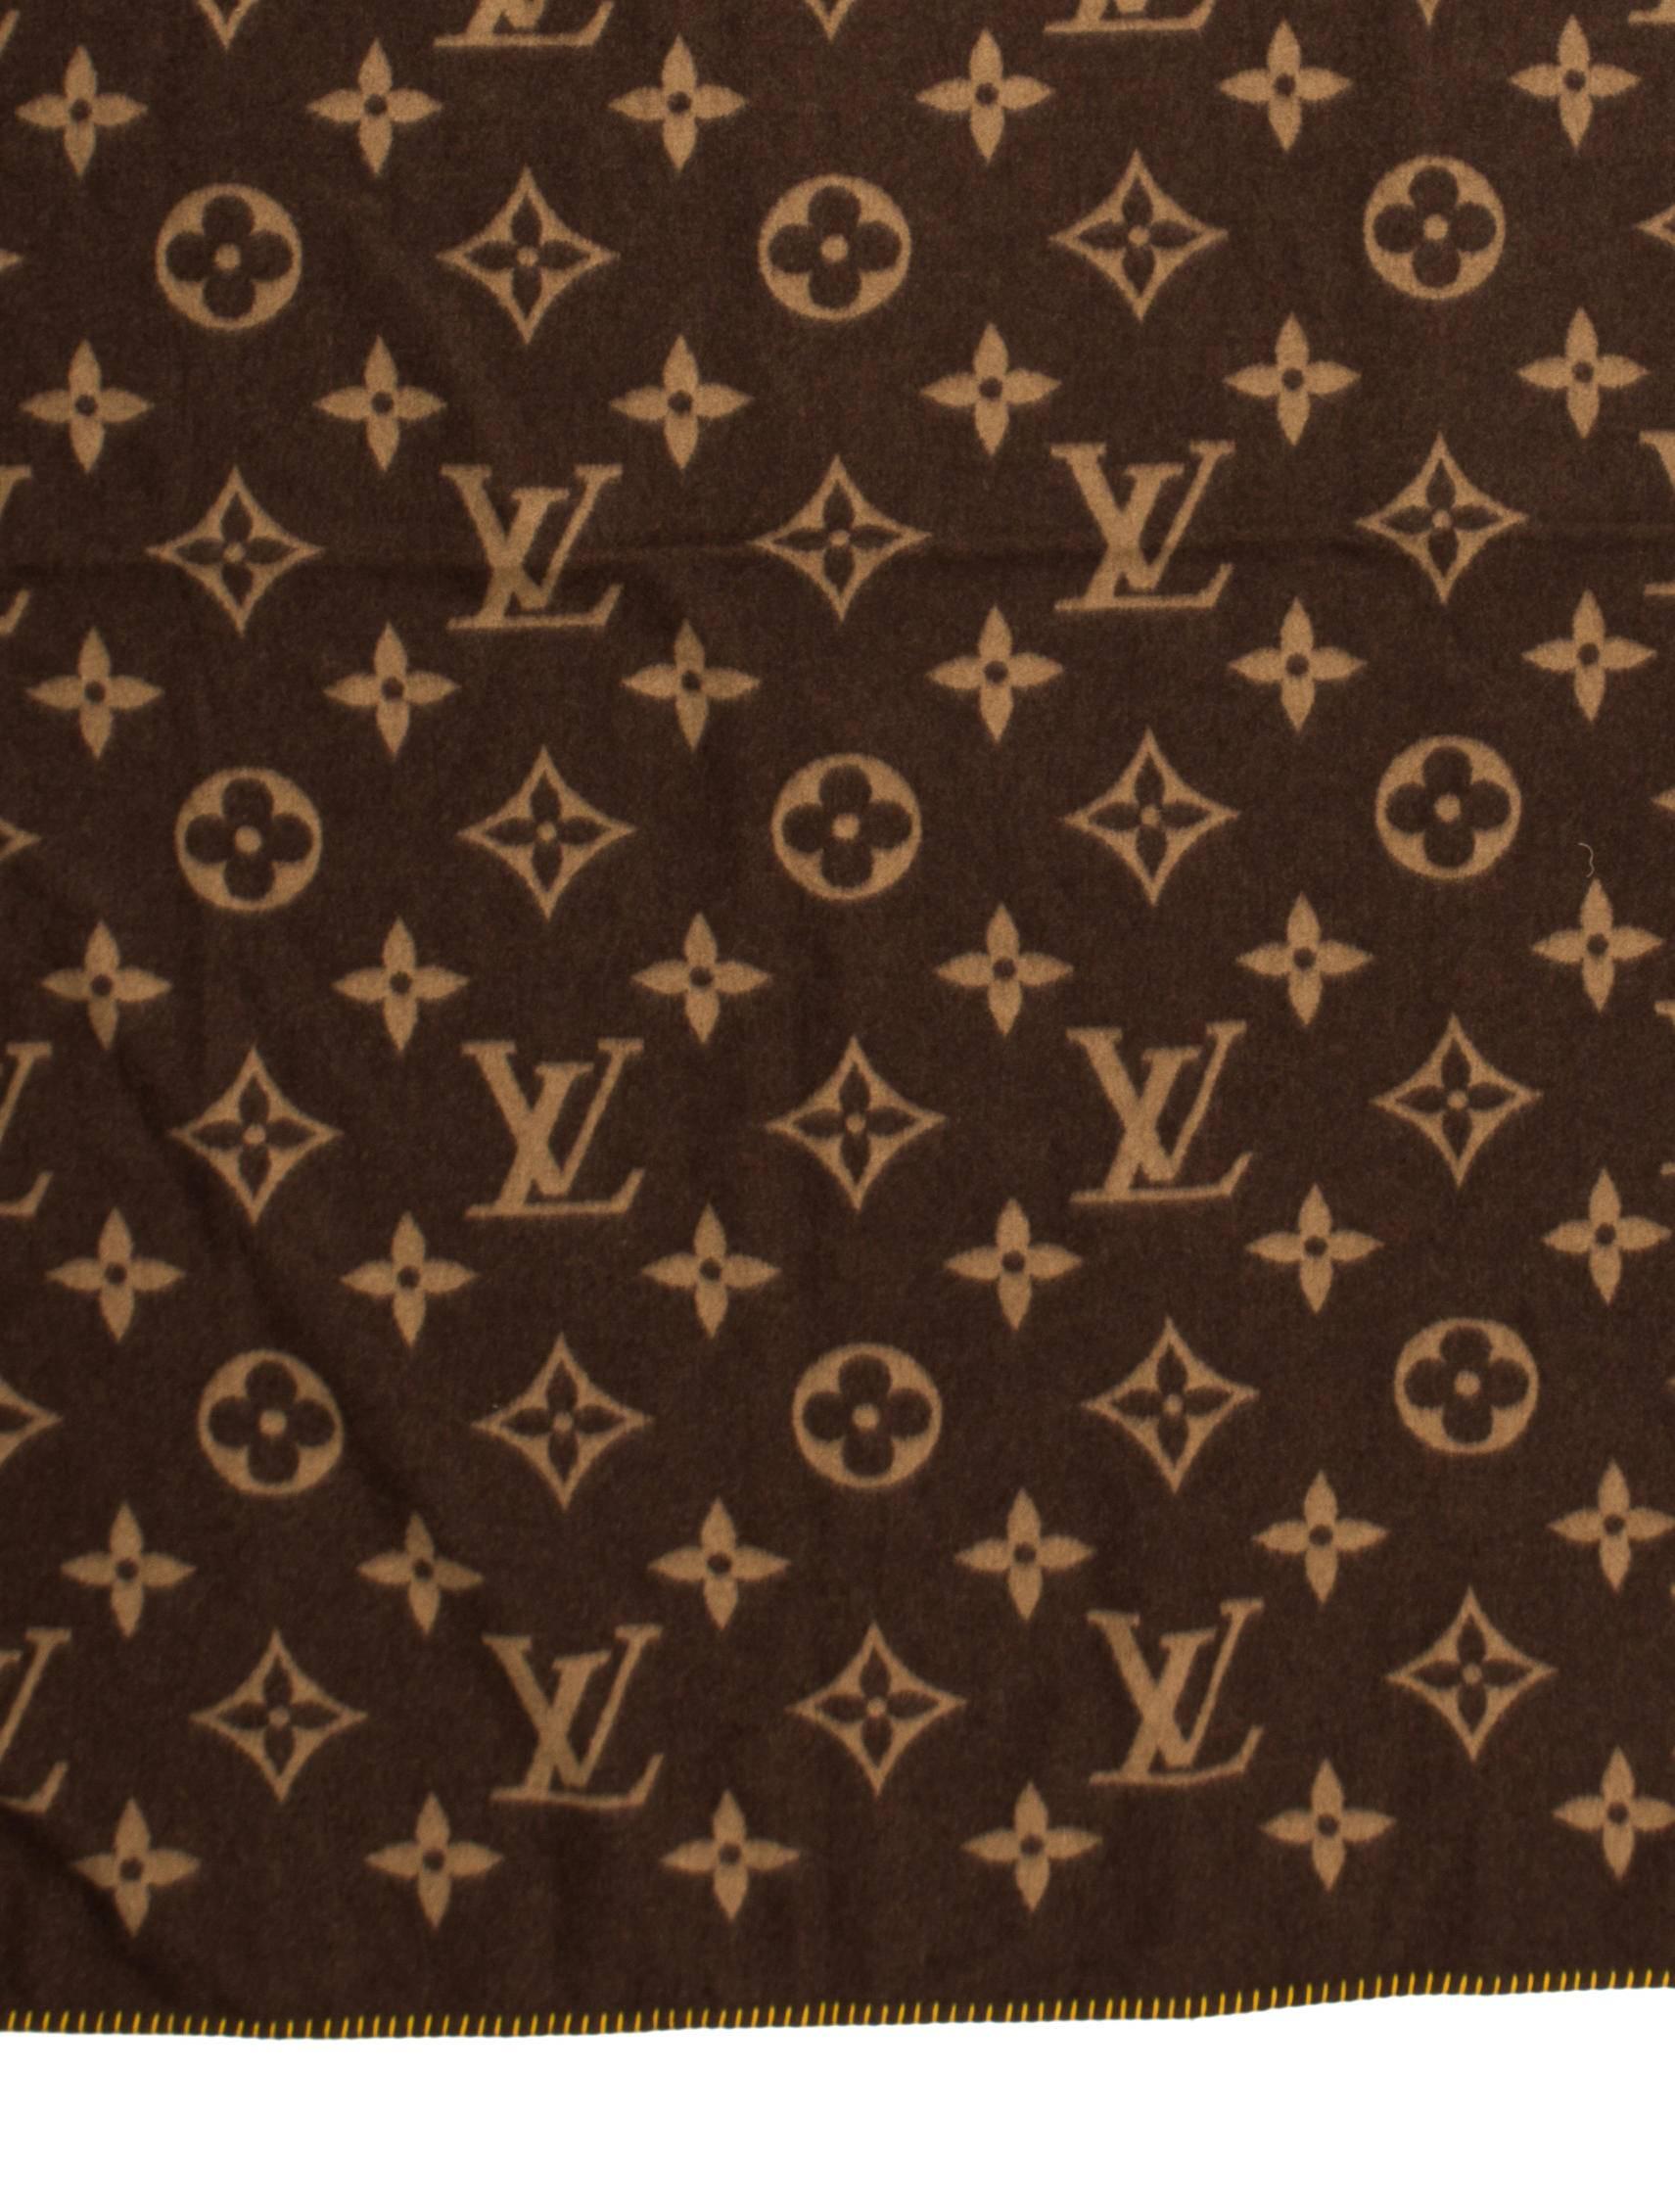 CURATOR'S NOTES

Cuddle up in style with this chic Louis Vuitton brown monogram throw blanket featuring LV logos and yellow stitching.  Includes the original Louis Vuitton box and dust bag making the perfect gift for the Louis Vuitton lover in